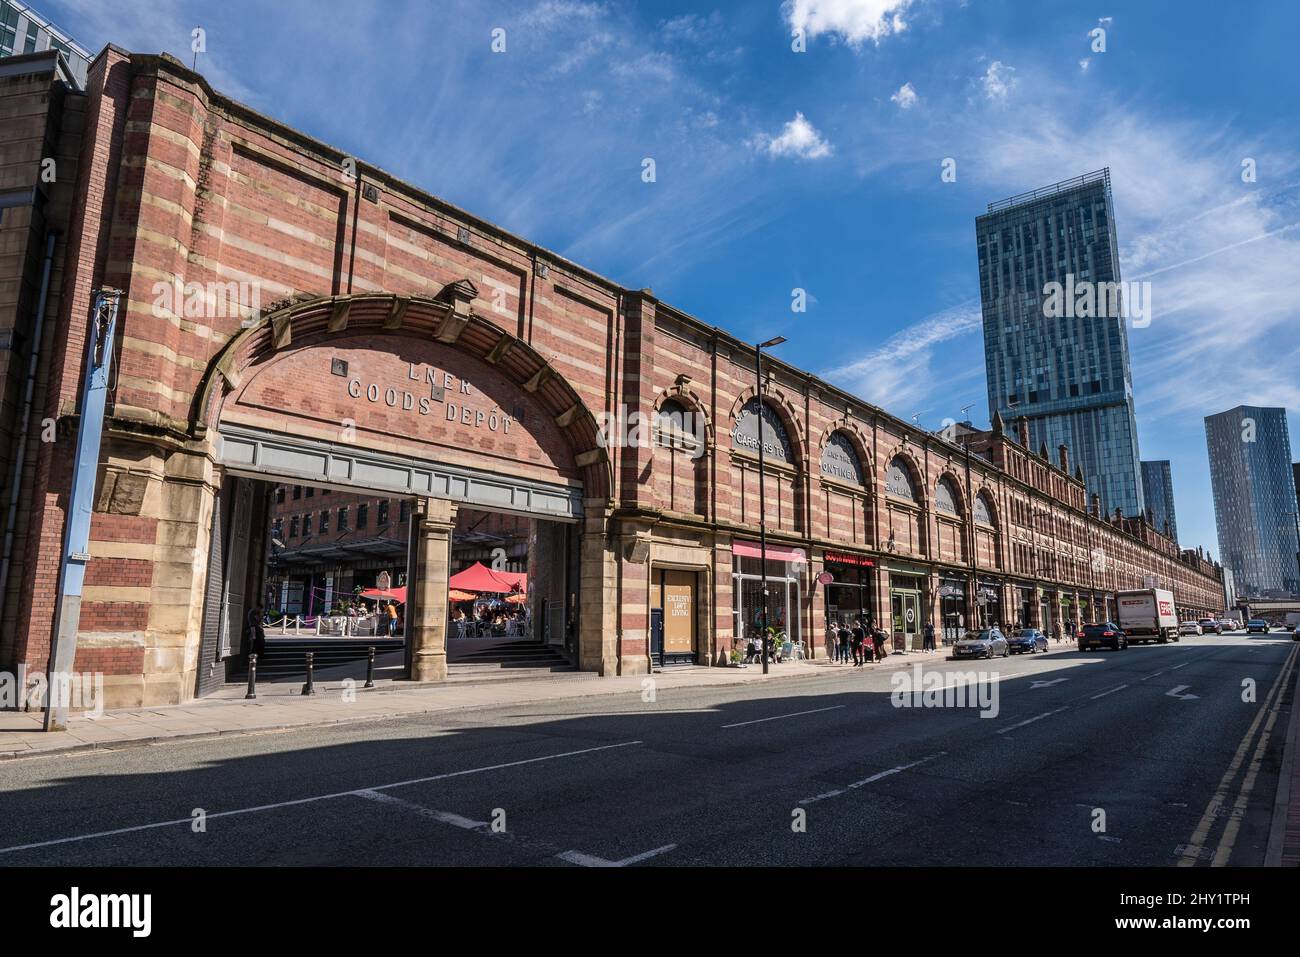 The Great Northern Shopping and Entertainment Complex, a former warehouse building now used as a shopping area in Manchester, England Stock Photo